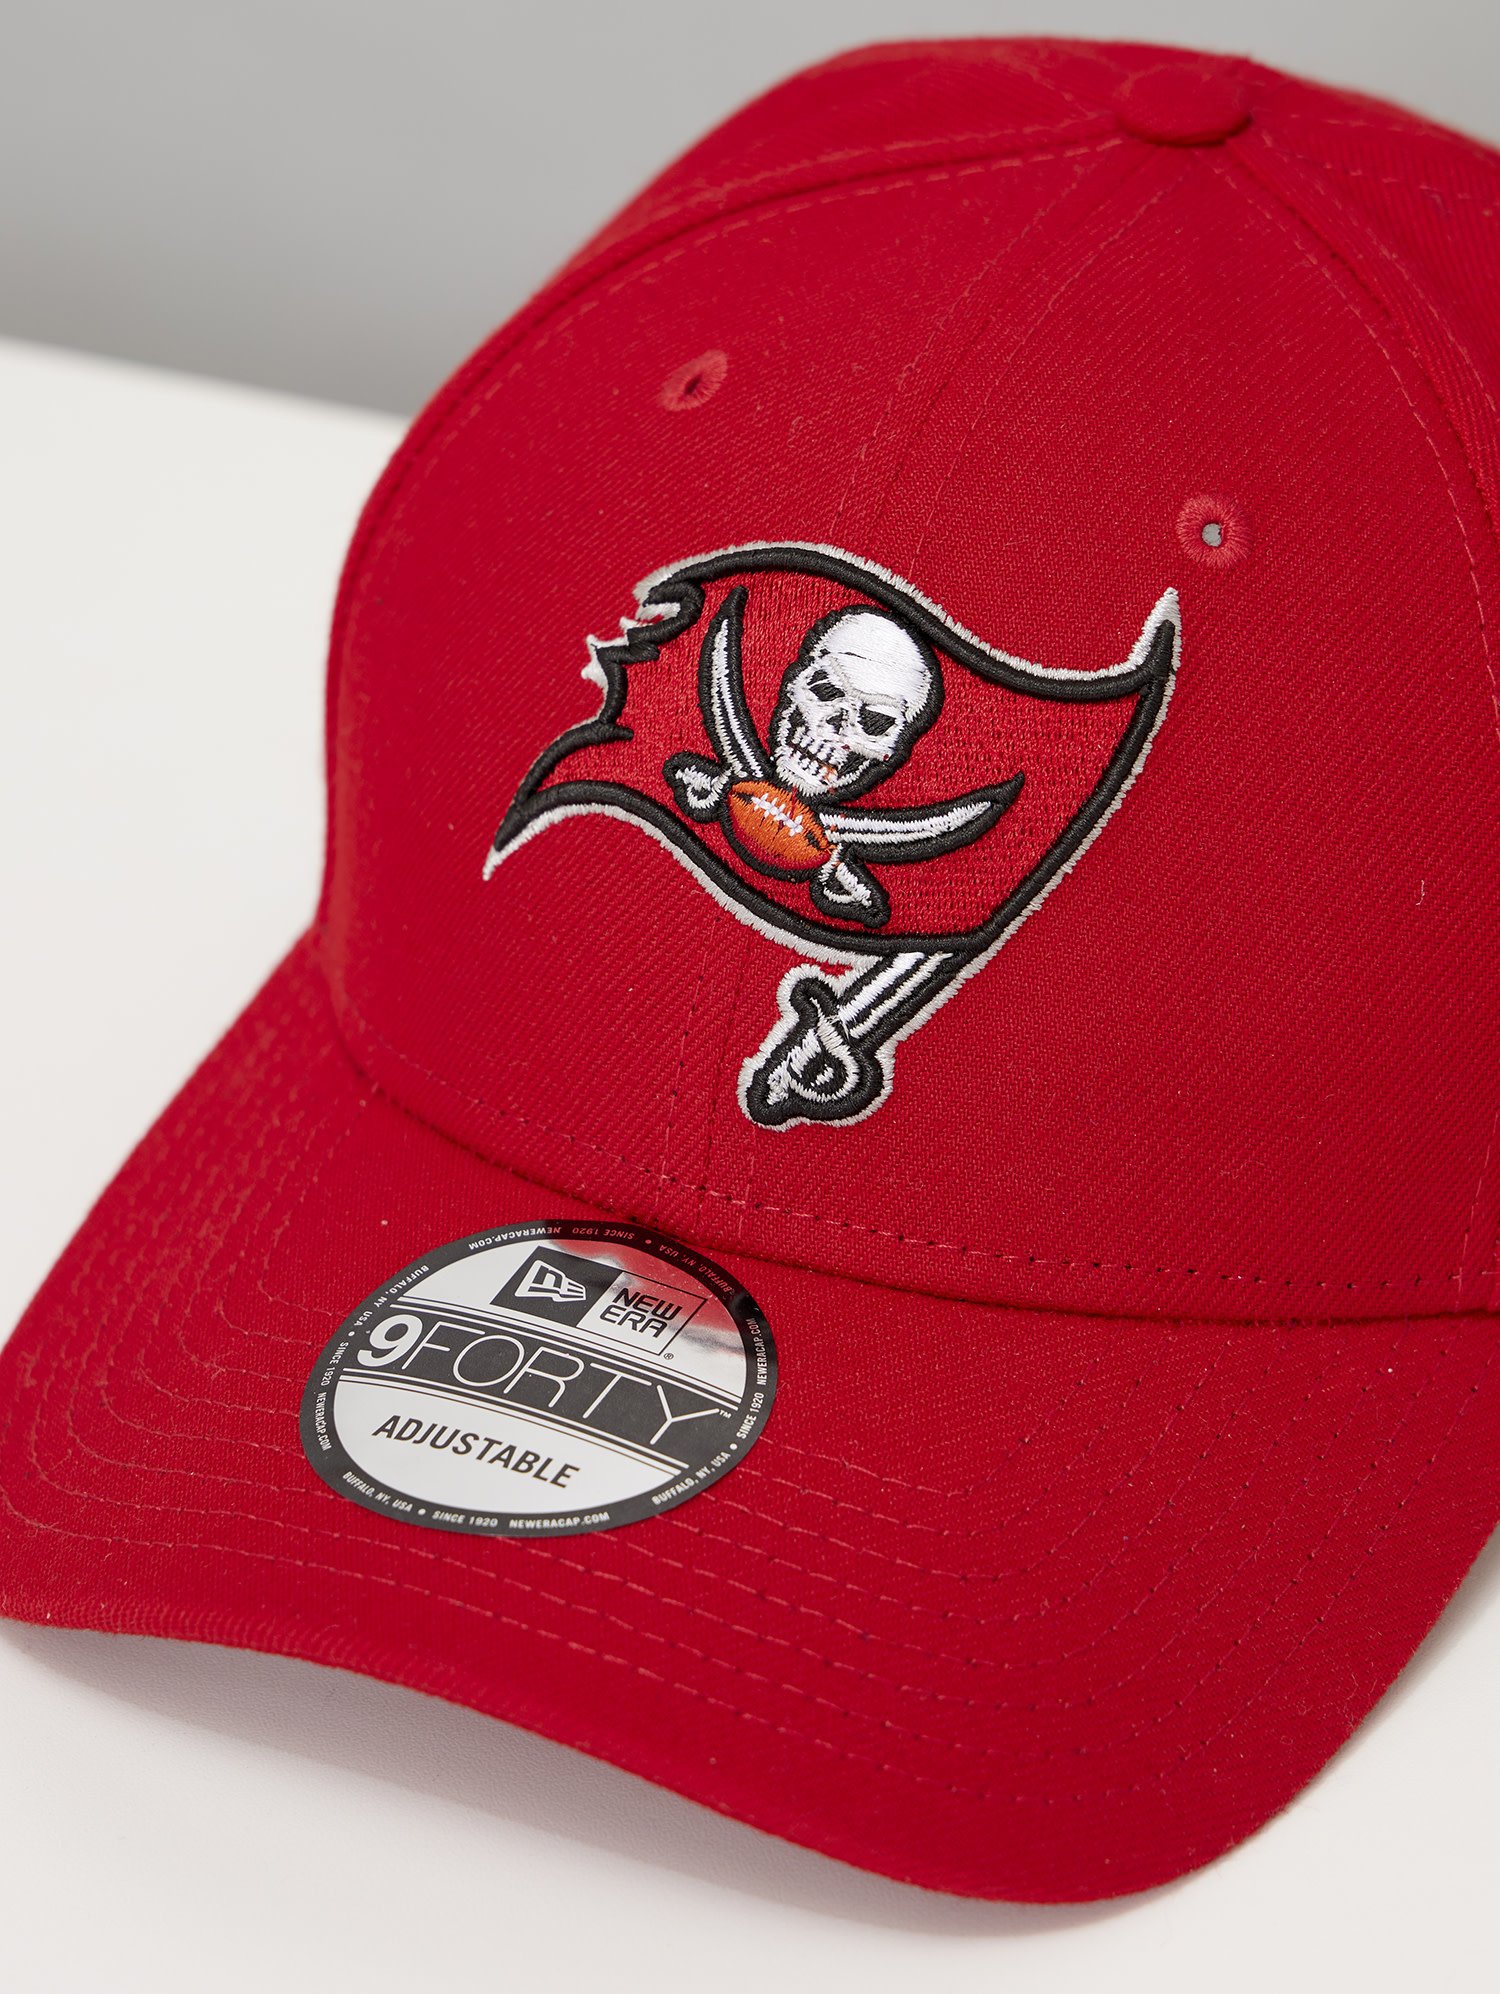 New Era Tampa Bay Buccaneers 9Forty Adjustable Hat - Tricolore Sports